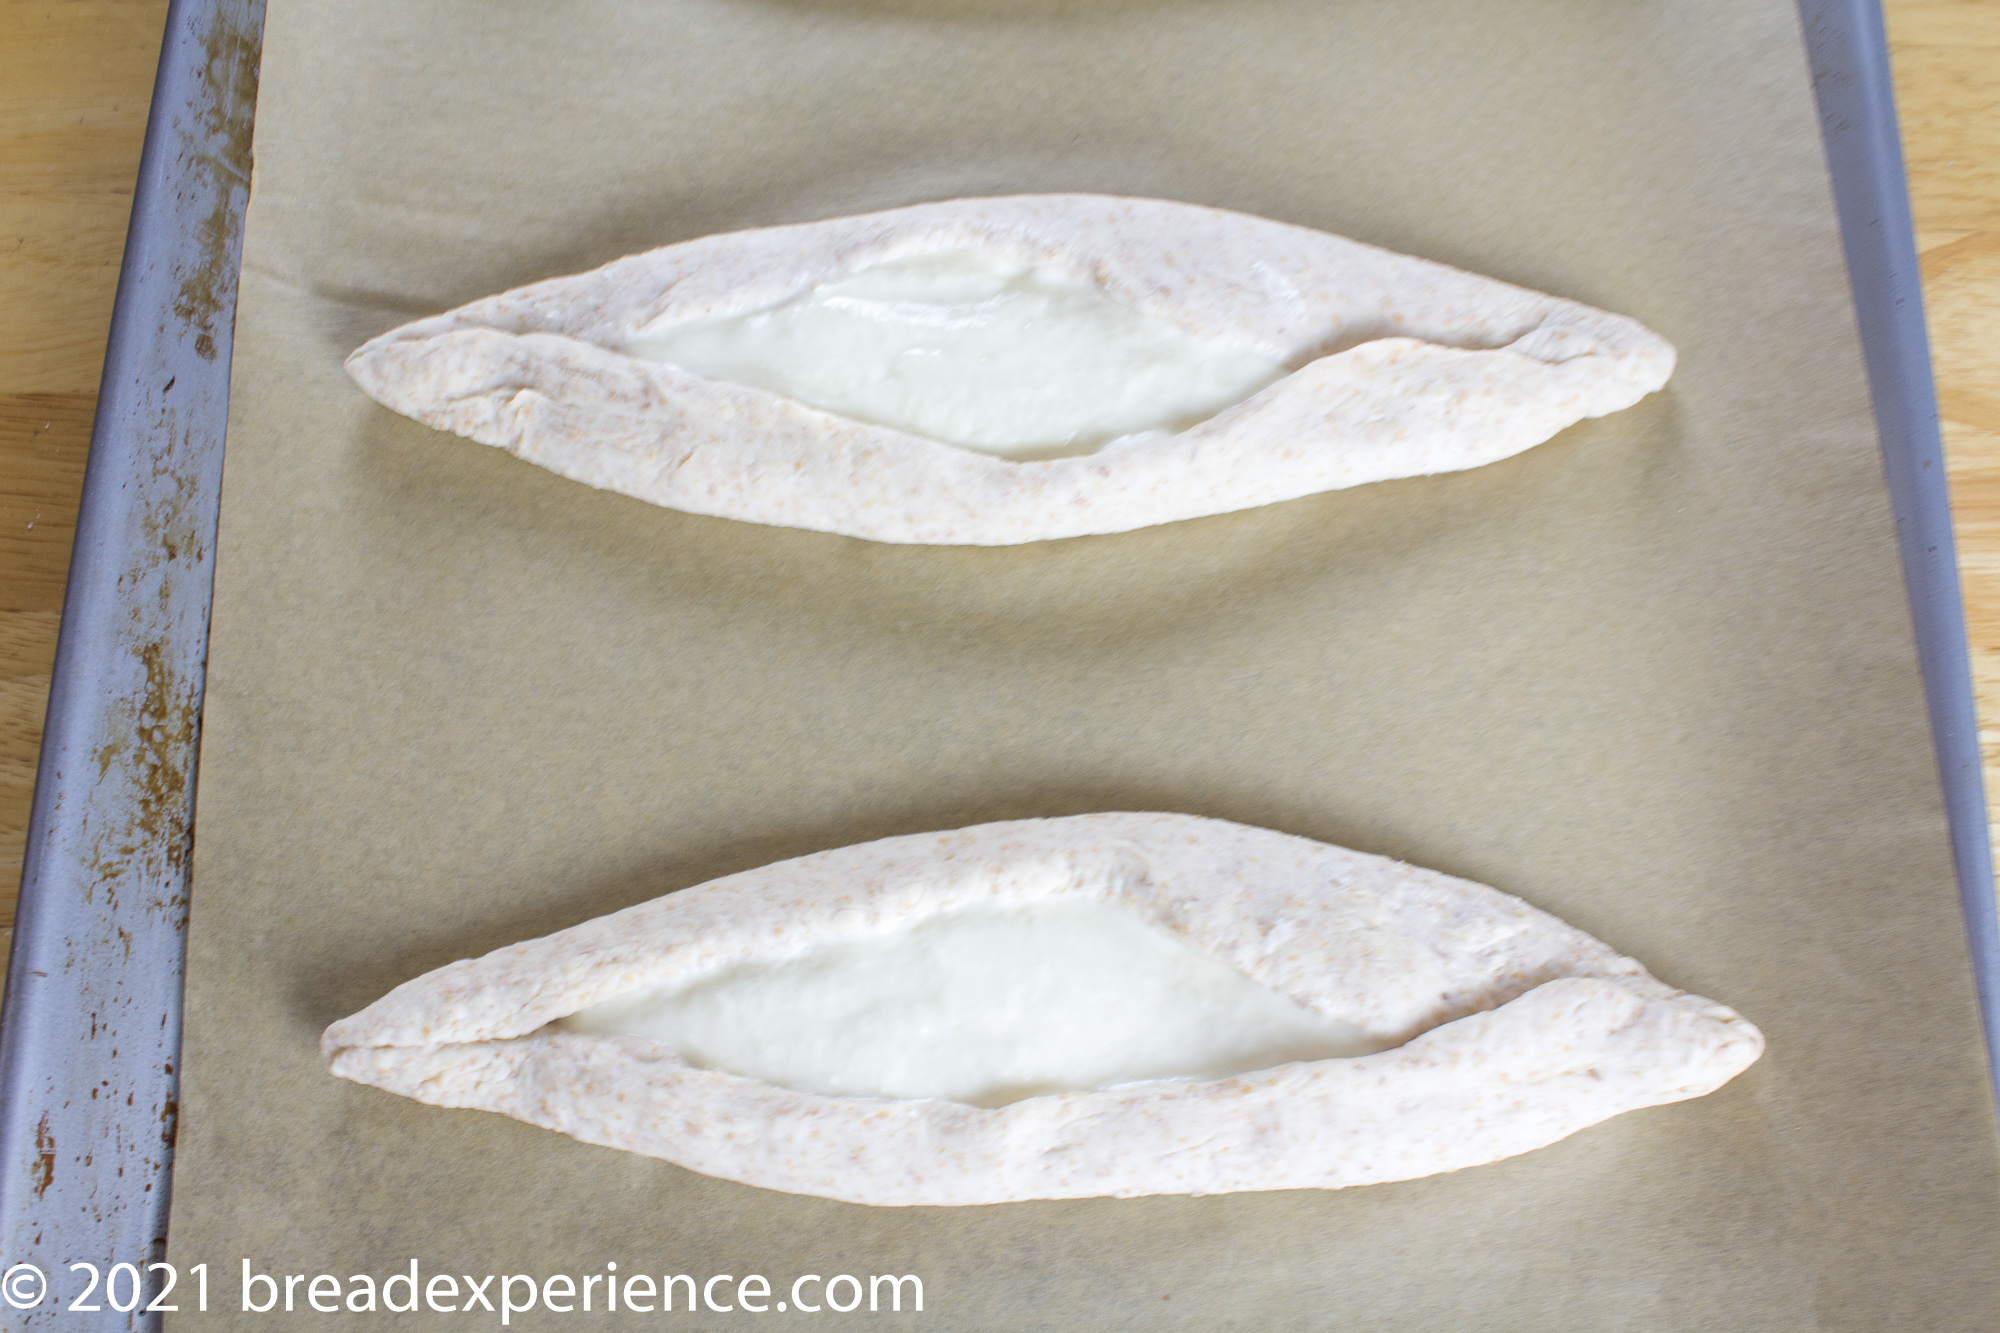 shaped and filled Ekmak bread boats